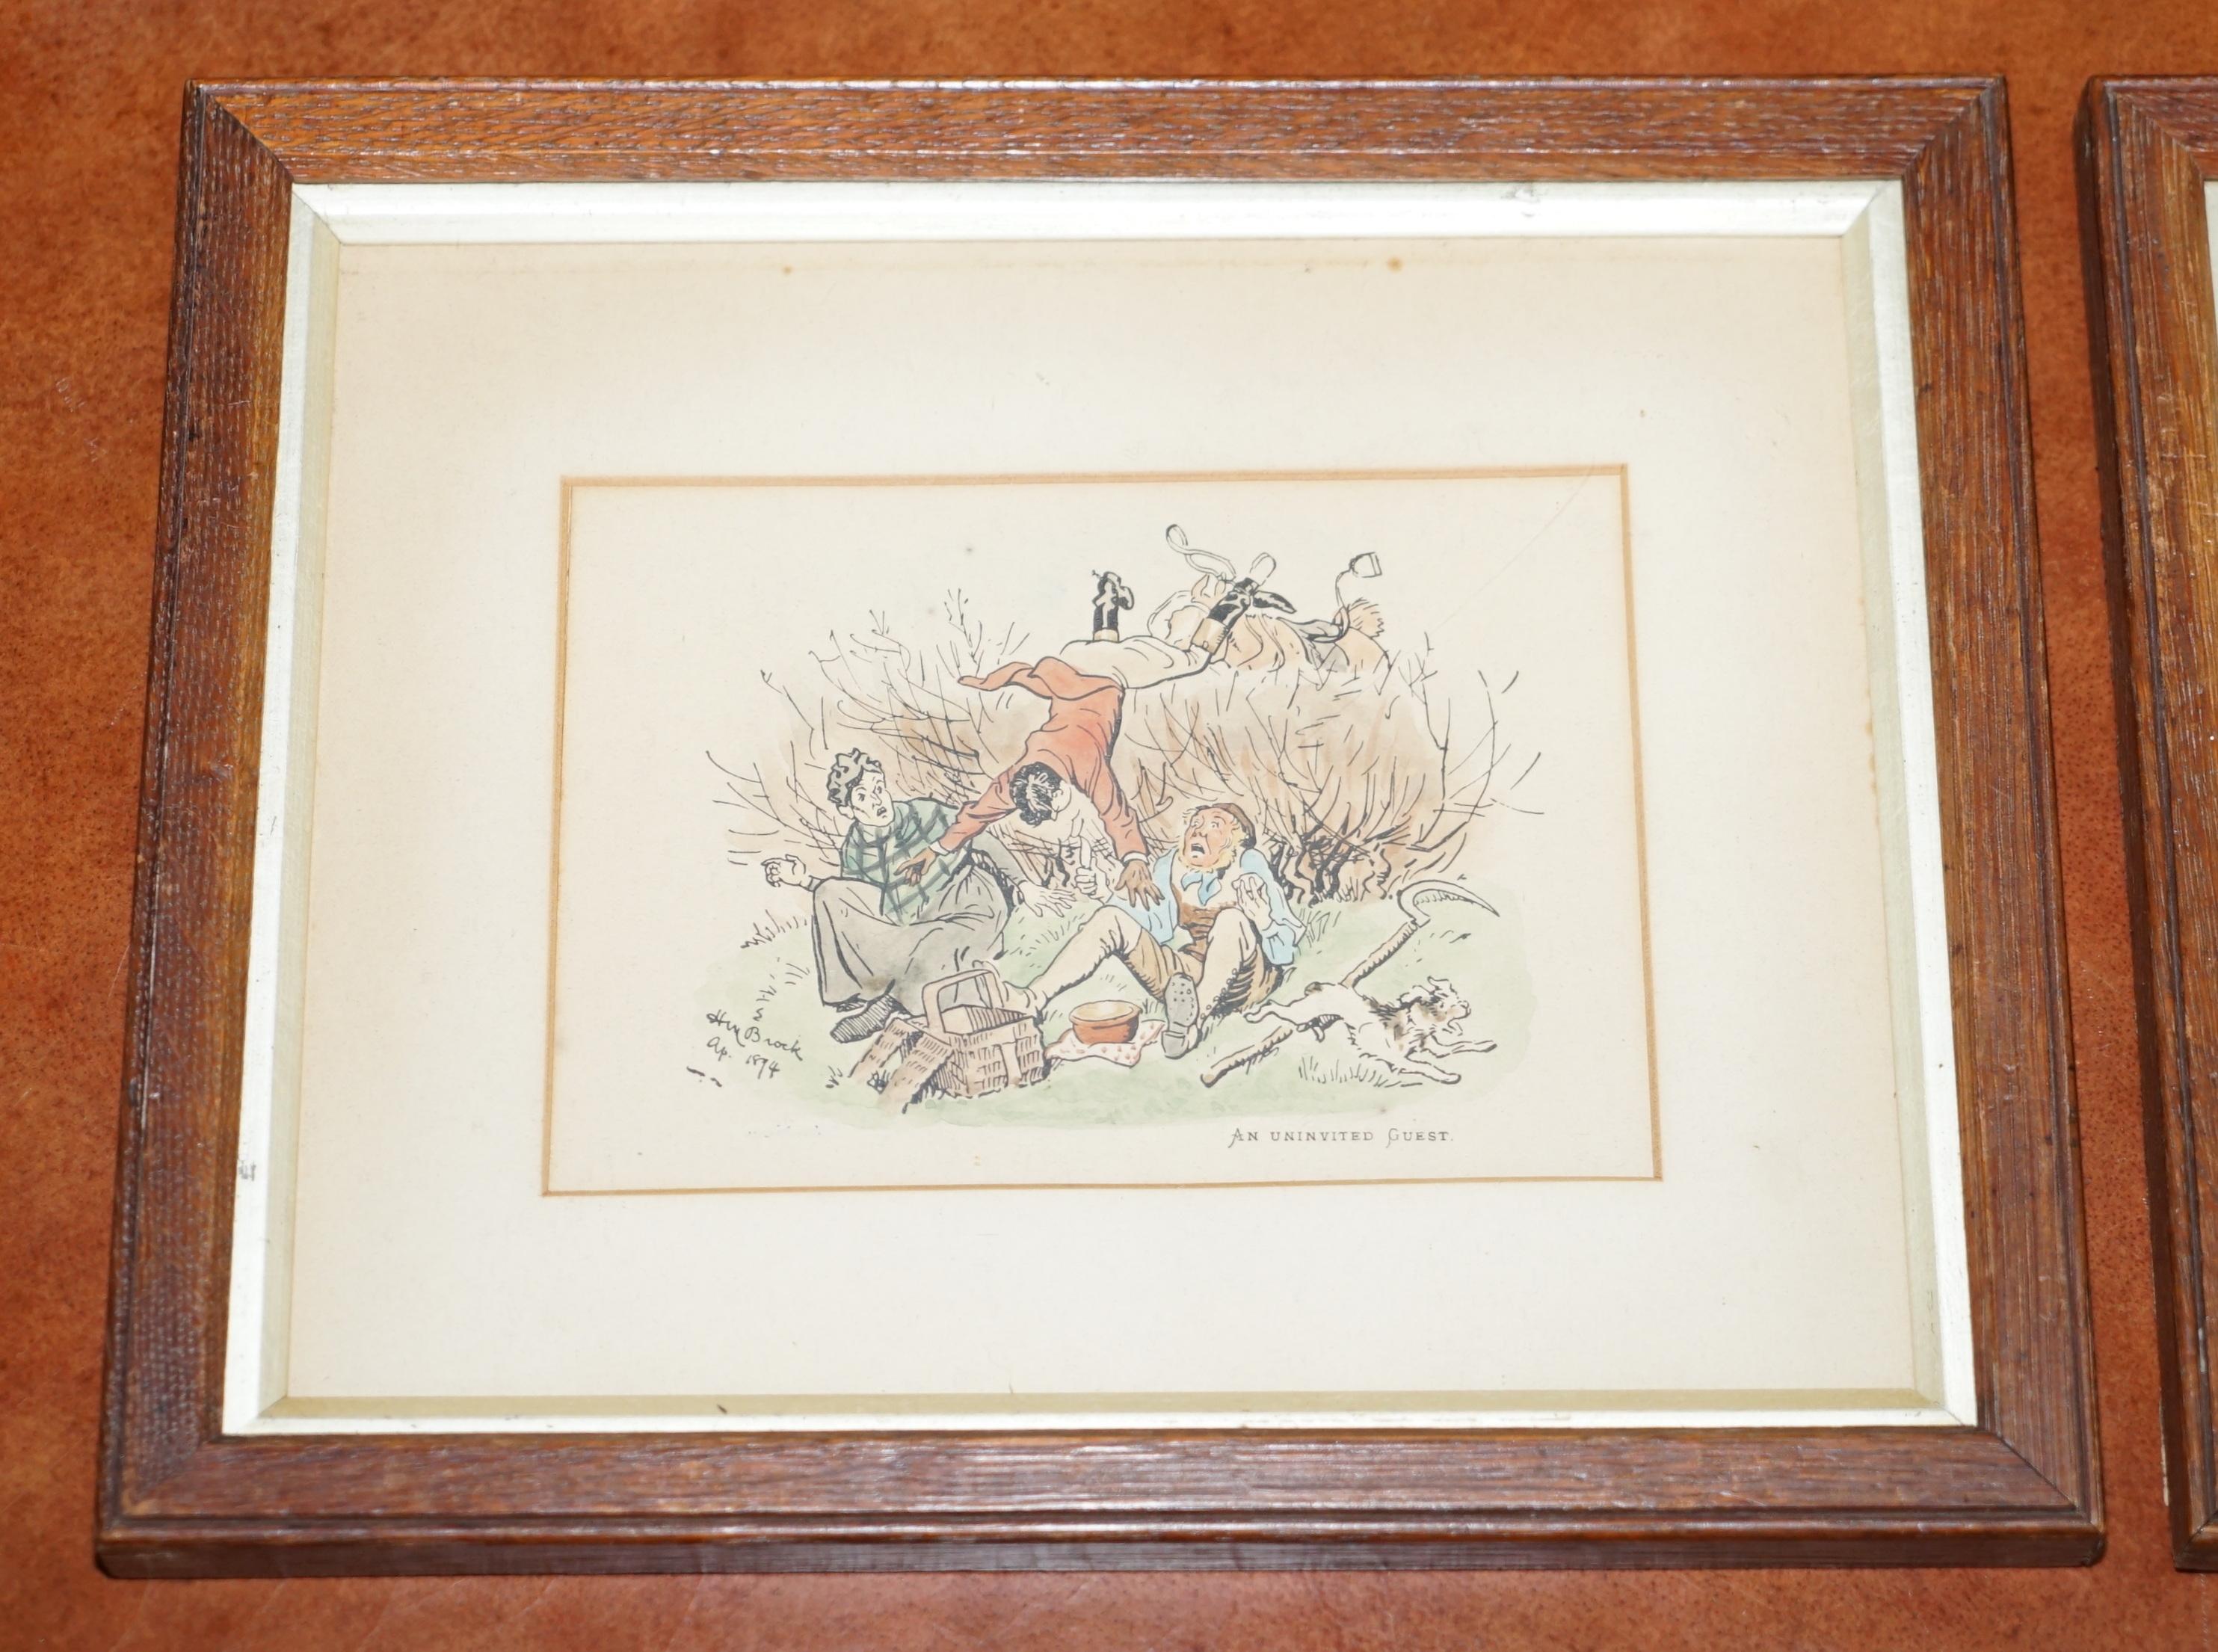 We are delighted to offer for sale this lovely pair of late Victorian watercolors signed H Brock and dated Apr 1894

The first is titled “An Uninvited Guest” and the second “A Lion In The Path” they are comical whimsey showing the Victorian